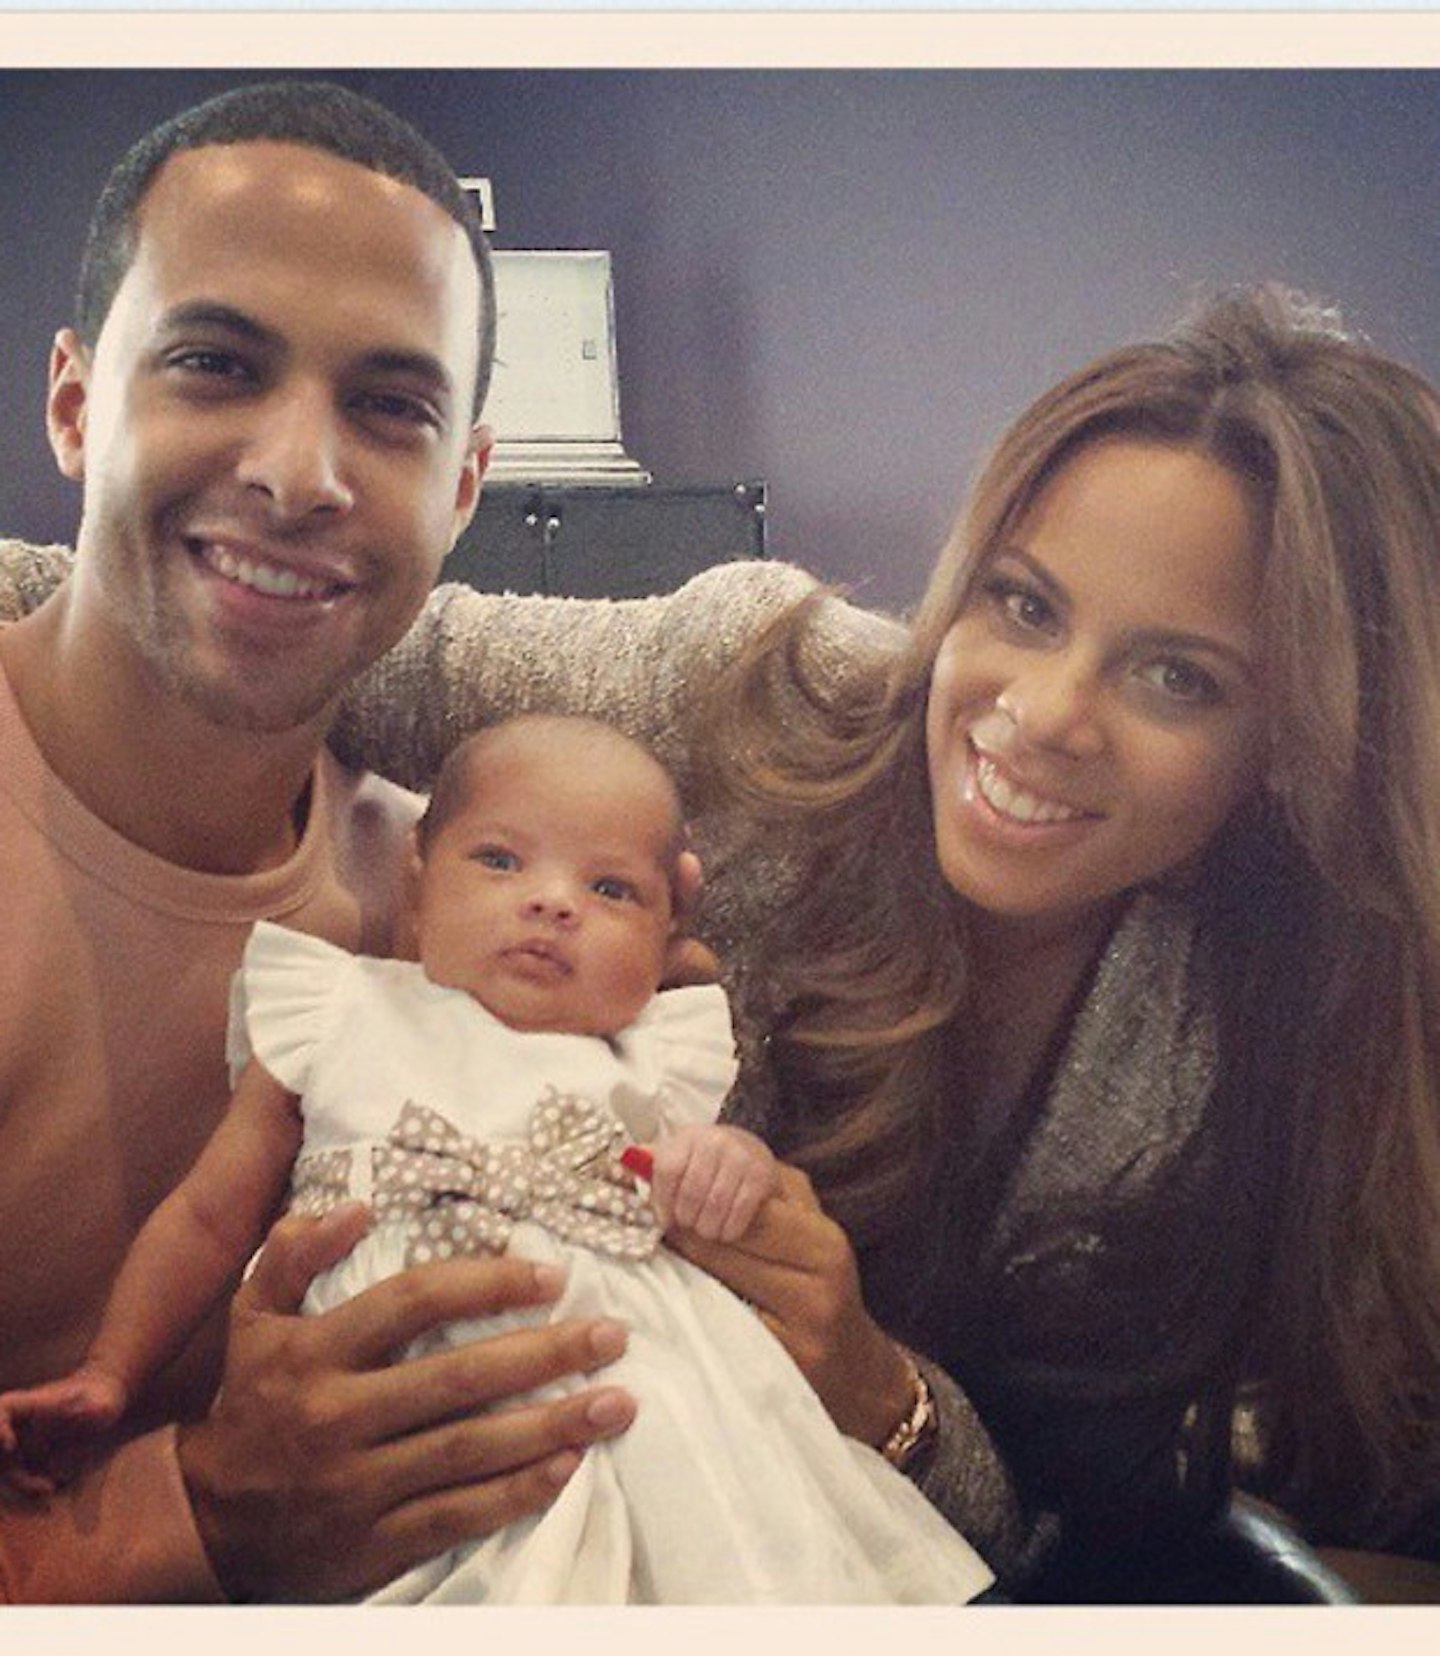 May 2013: Rochelle and Marvin Humes welcomed their first daughter Alaia-Mai on 20 May 2013